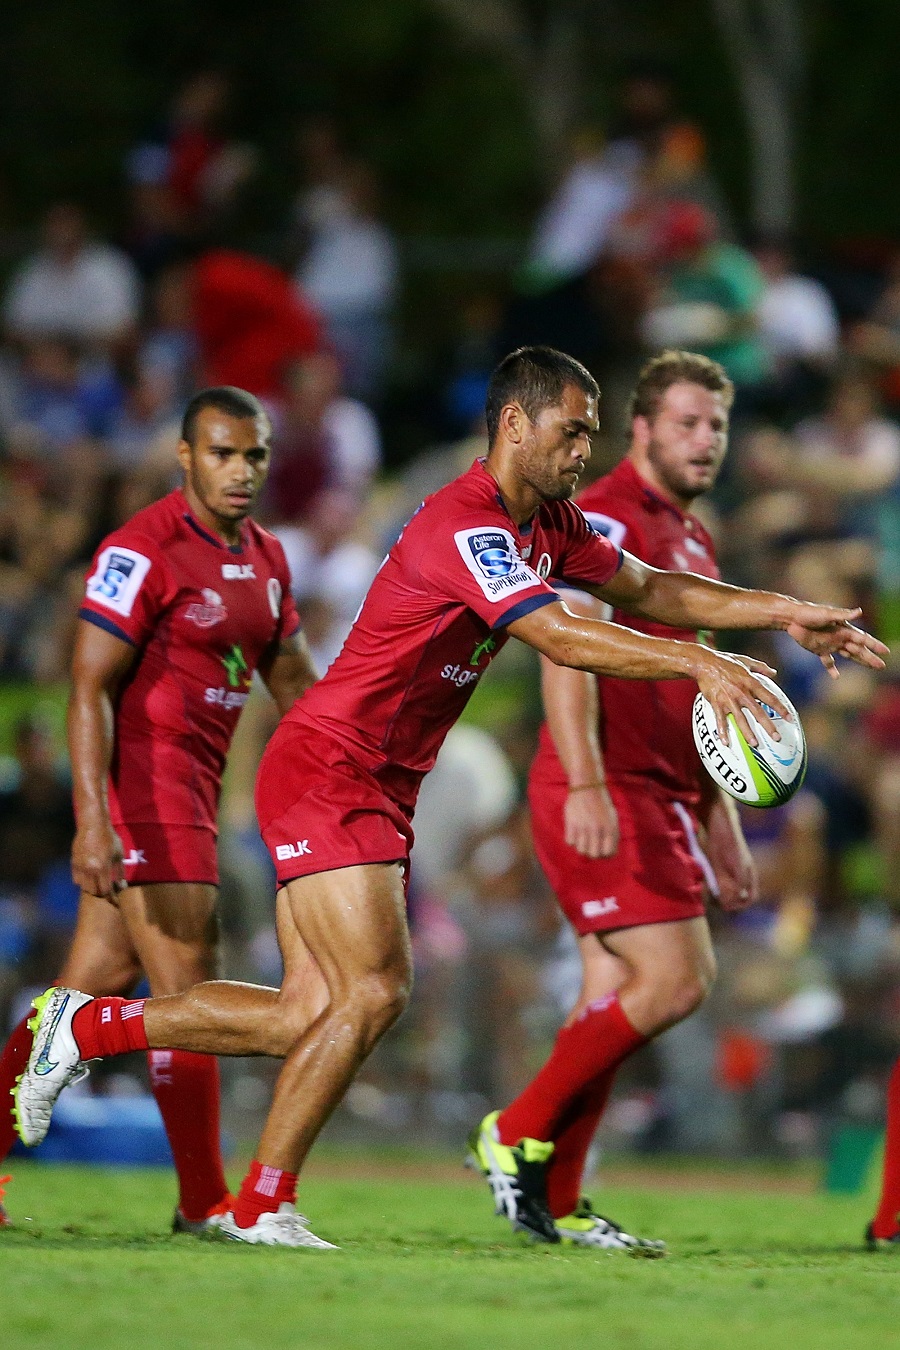 Former rugby league and AFL player Karmichael Hunt makes his union debut for Reds in Cairns 